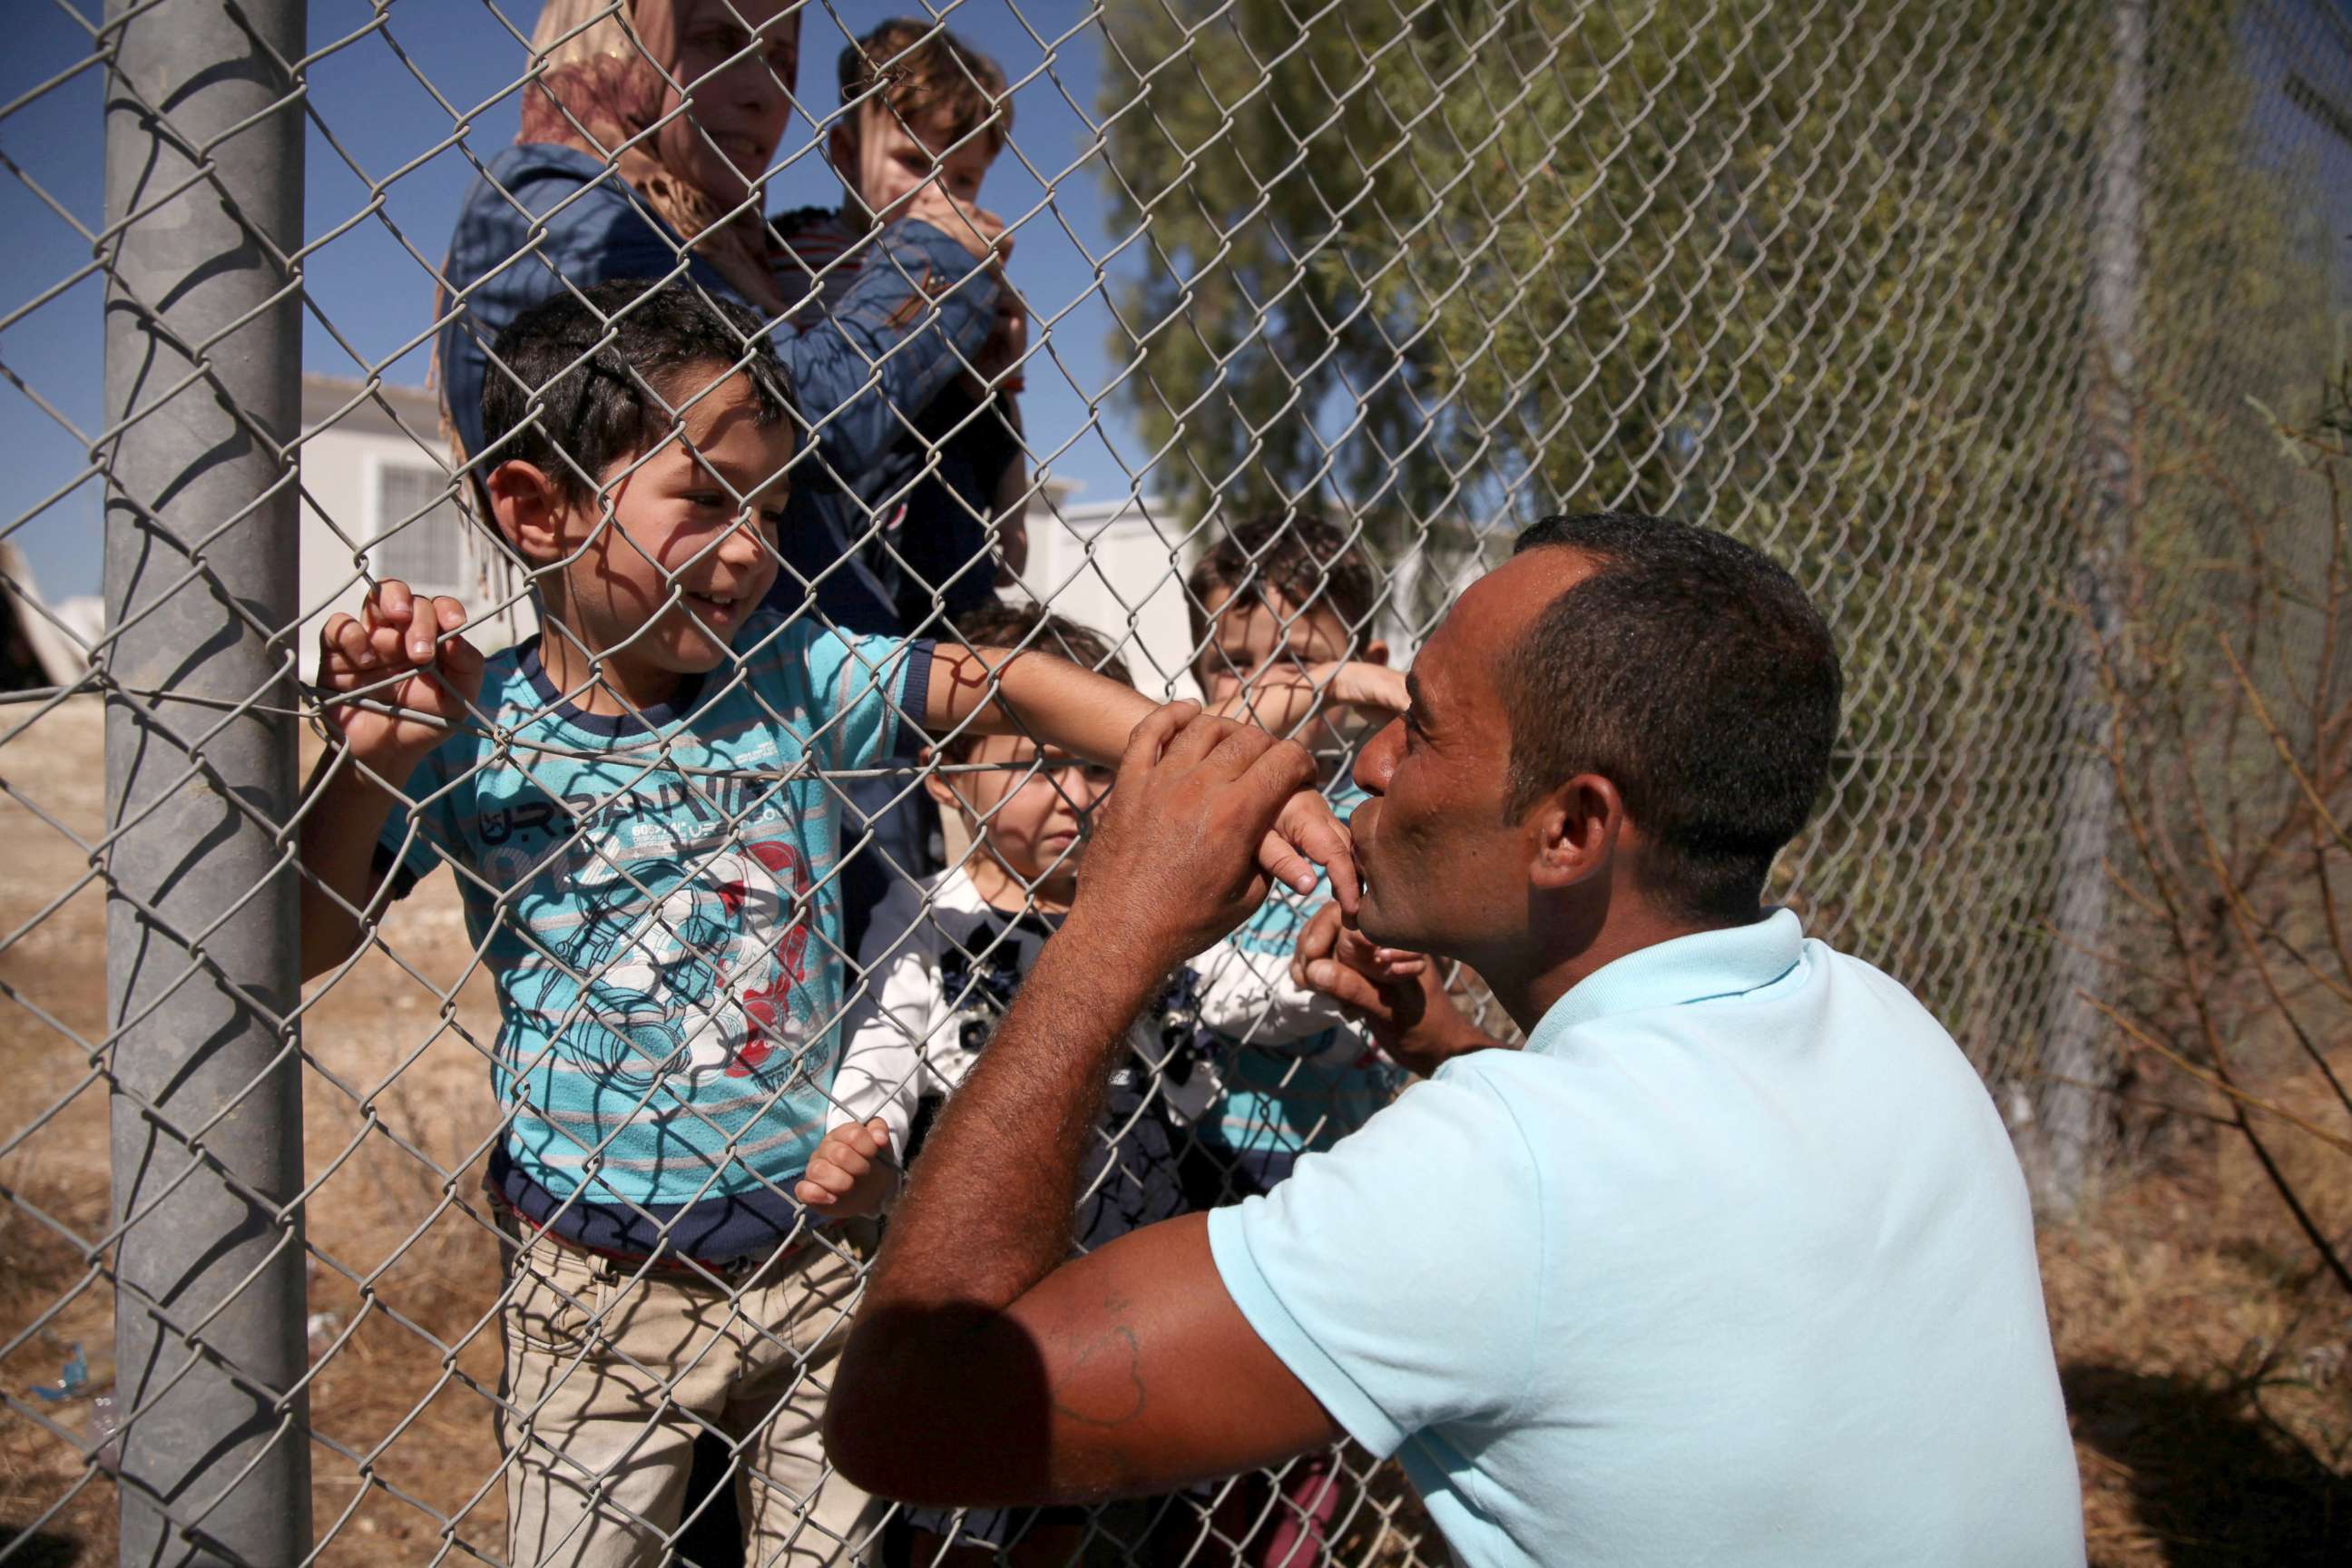 PHOTO: Ammar Hammasho from Syria, who lives in Cyprus, kisses his children who arrived at the refugee camp in Kokkinotrimithia, outside Nicosia, Cyprus, Sept. 10, 2017.